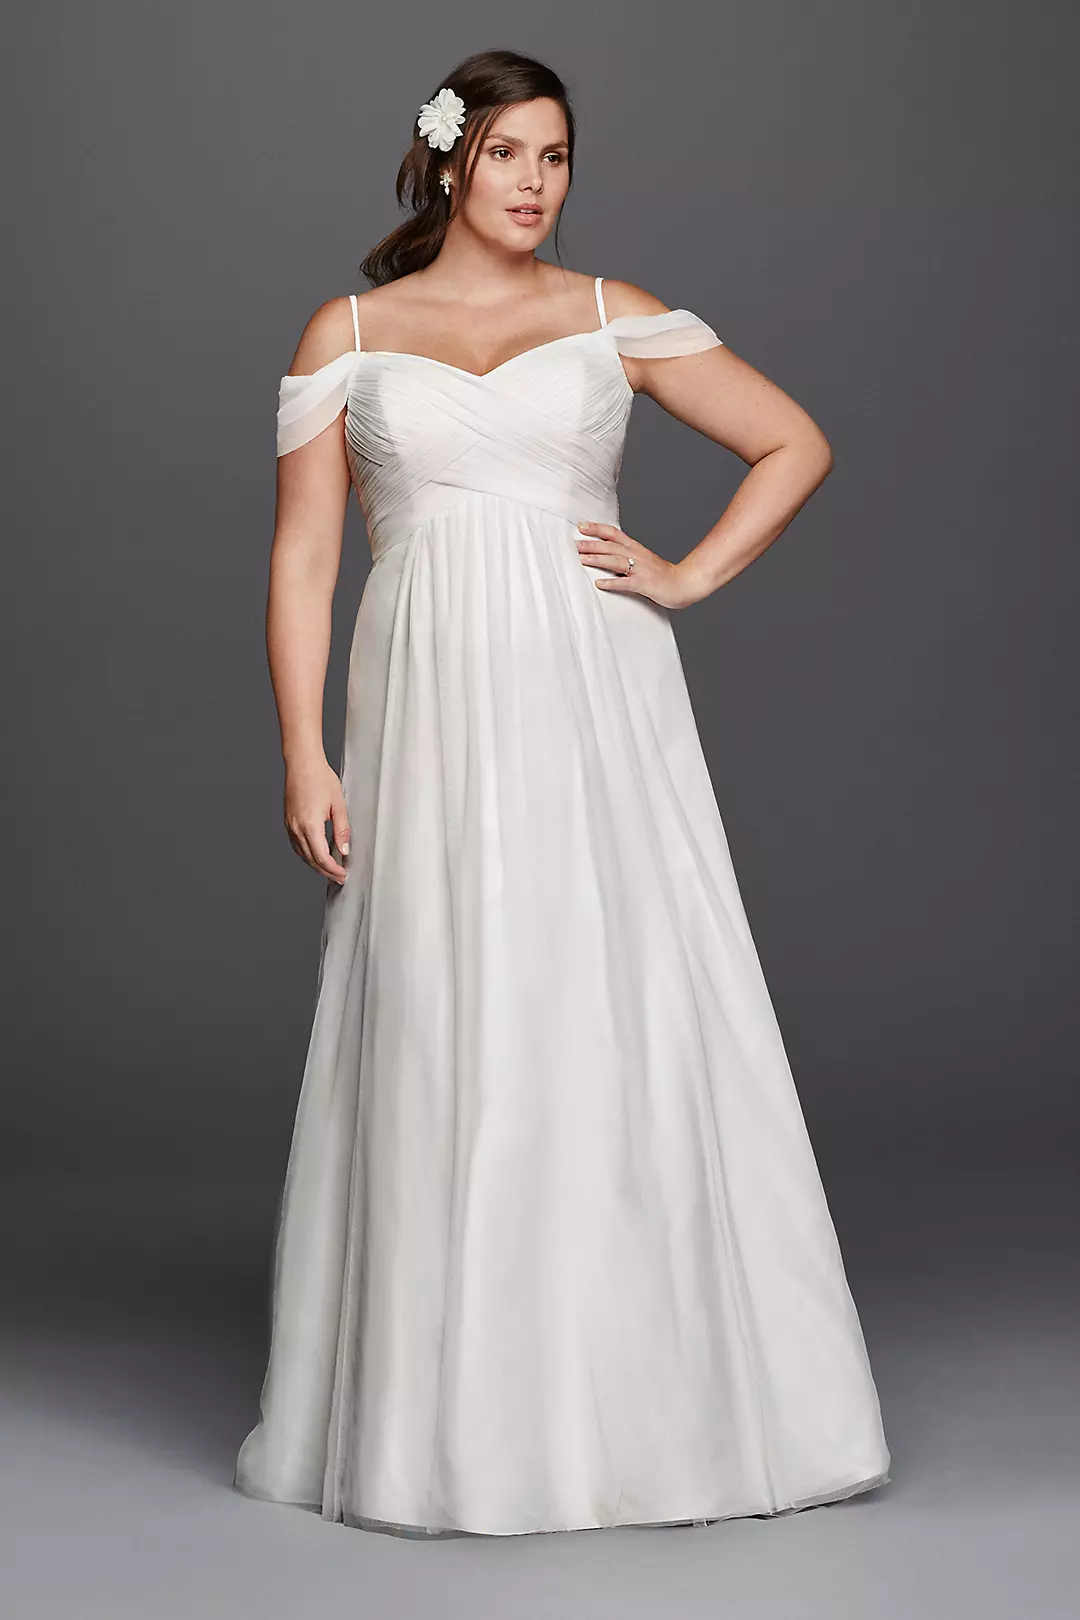 Tulle A-line Wedding Dress with Swag Sleeves Image